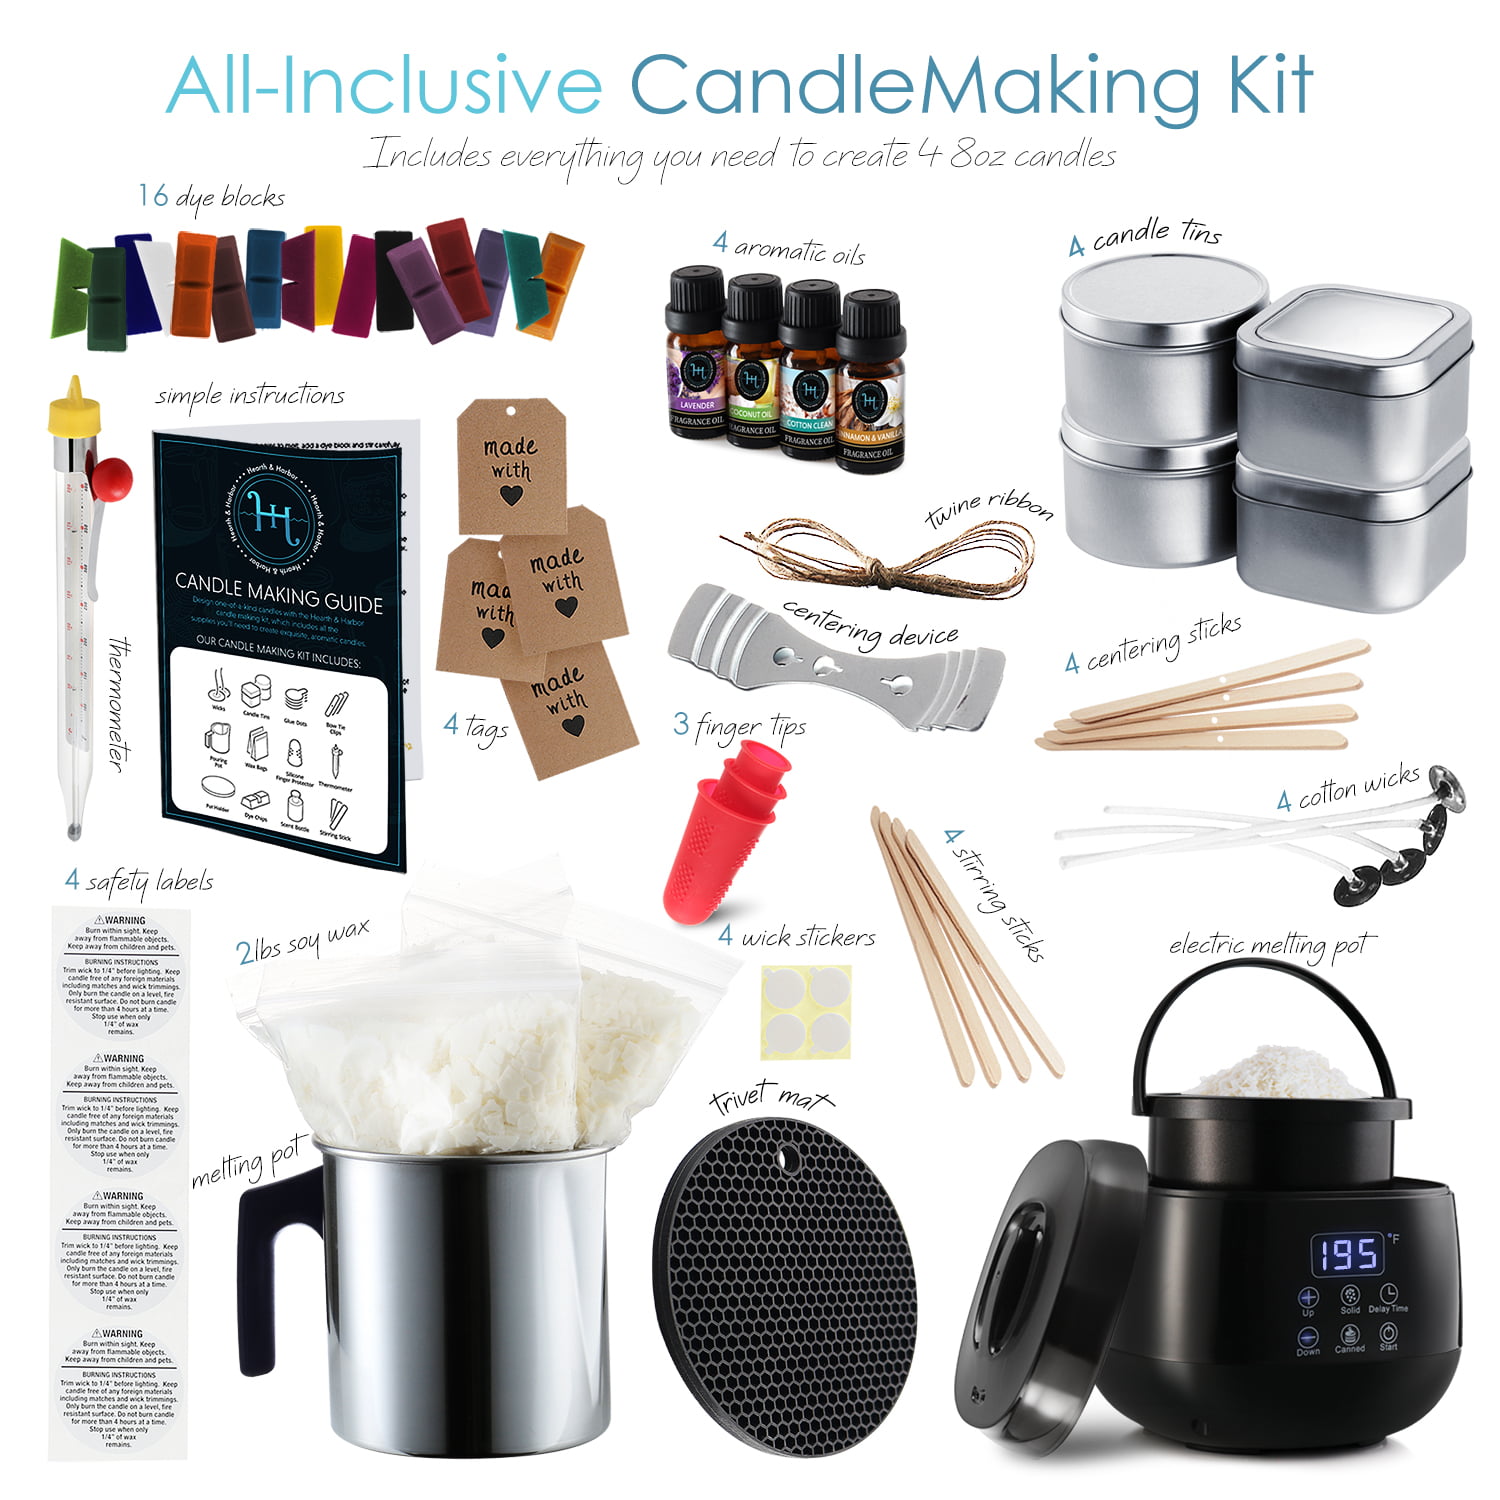 Benooa Candle Making Kit with Electric Hot Plate, DIY Scented Candle Making  Supplies Set with Beeswax, Candle Wicks, Fragrance Oil, Candle Dye and  Candle Jars 02 Kit